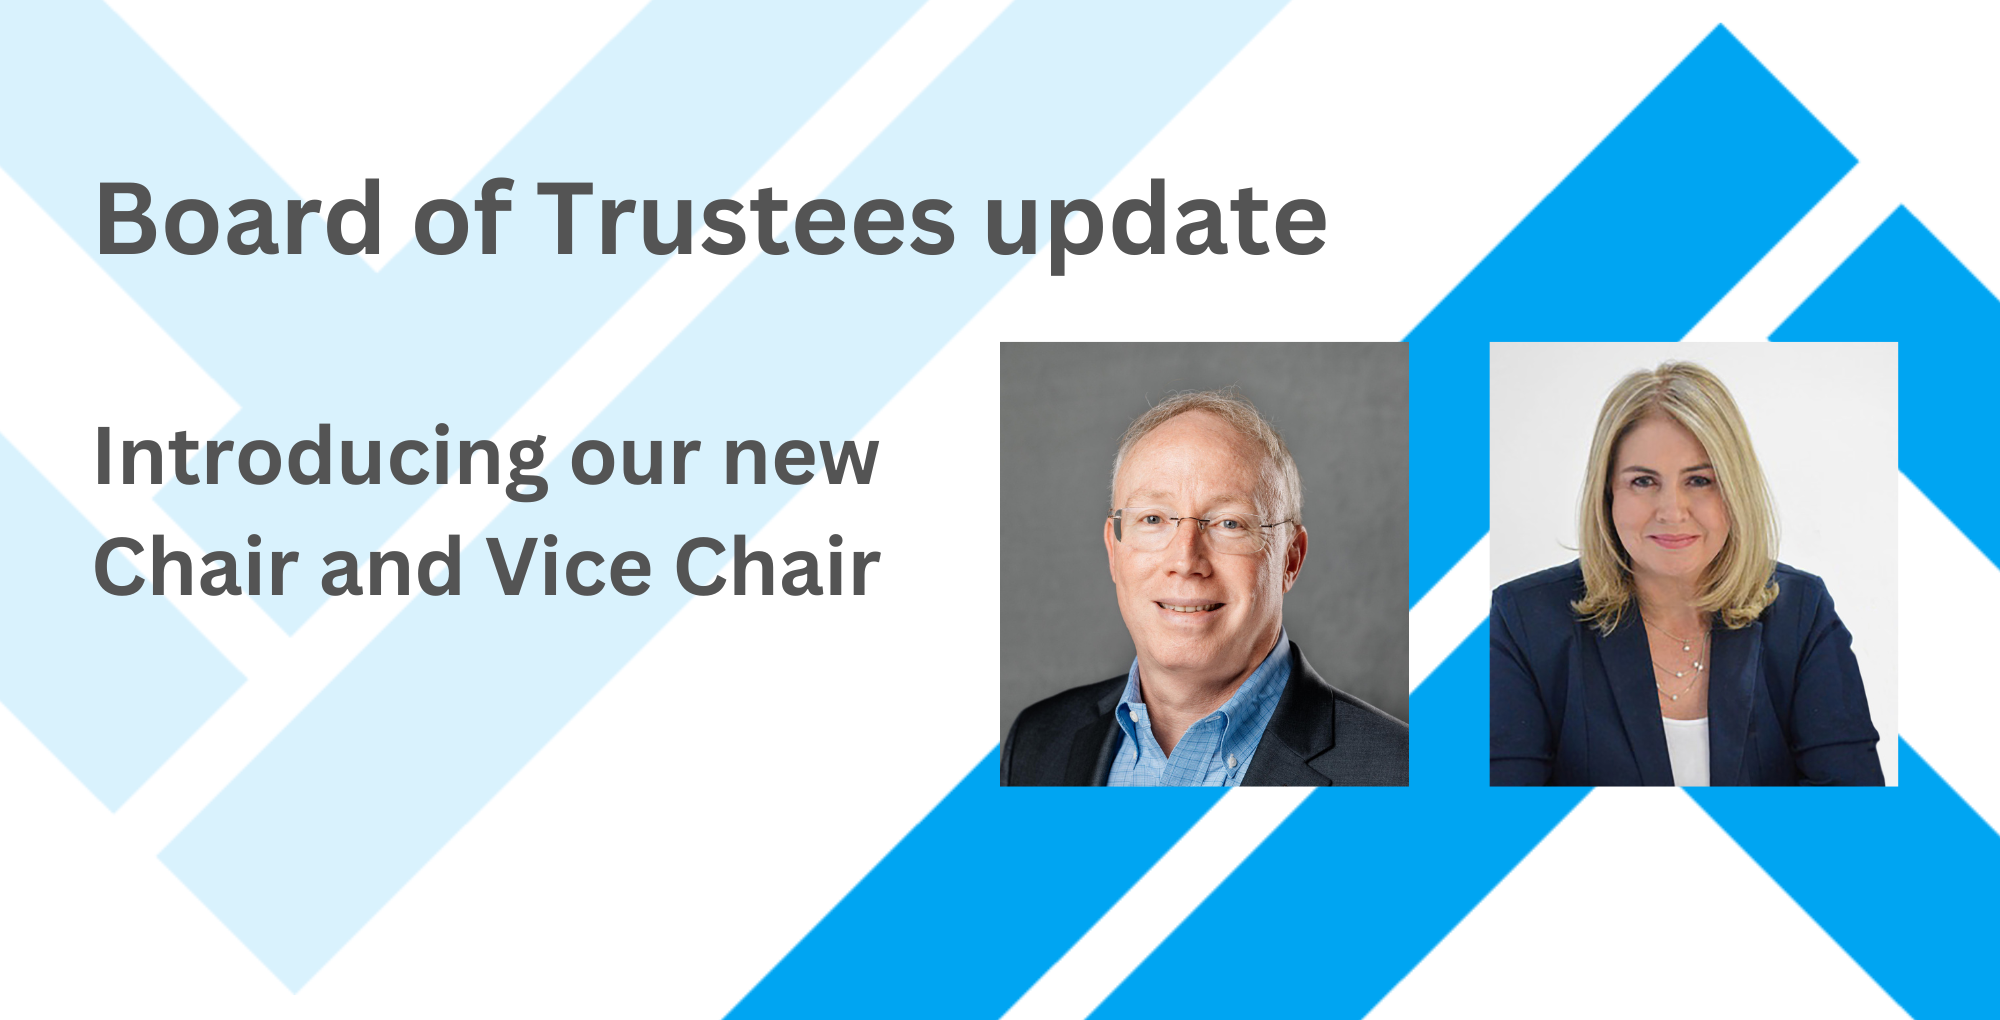 Board of Trustees update. Ron Brill becomes Chair and Salome Keet becomes Vice Chair of the ITAM Forum Board of Trustees.